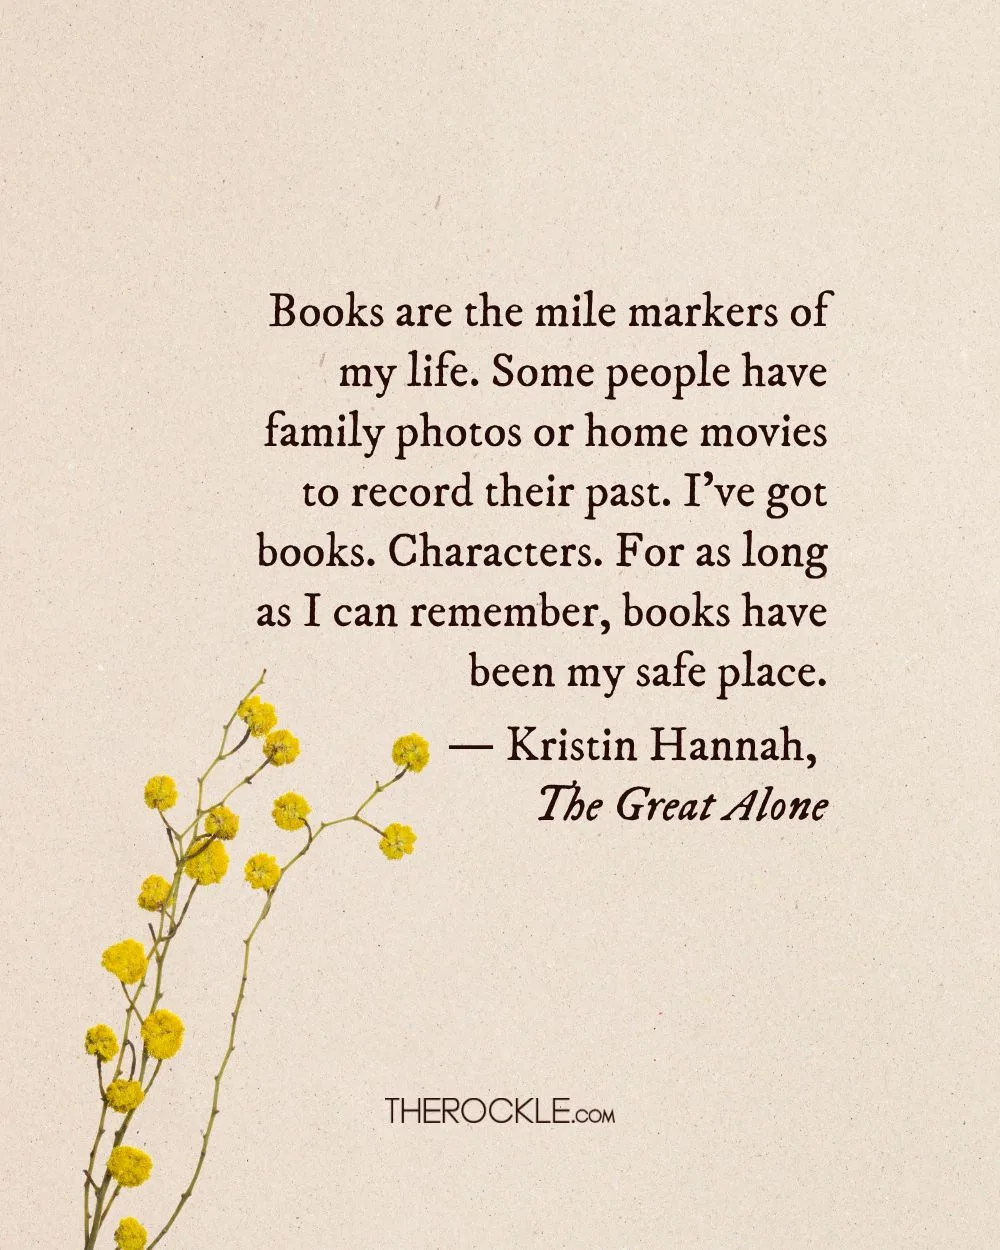 Kristin Hannah on the significance of books